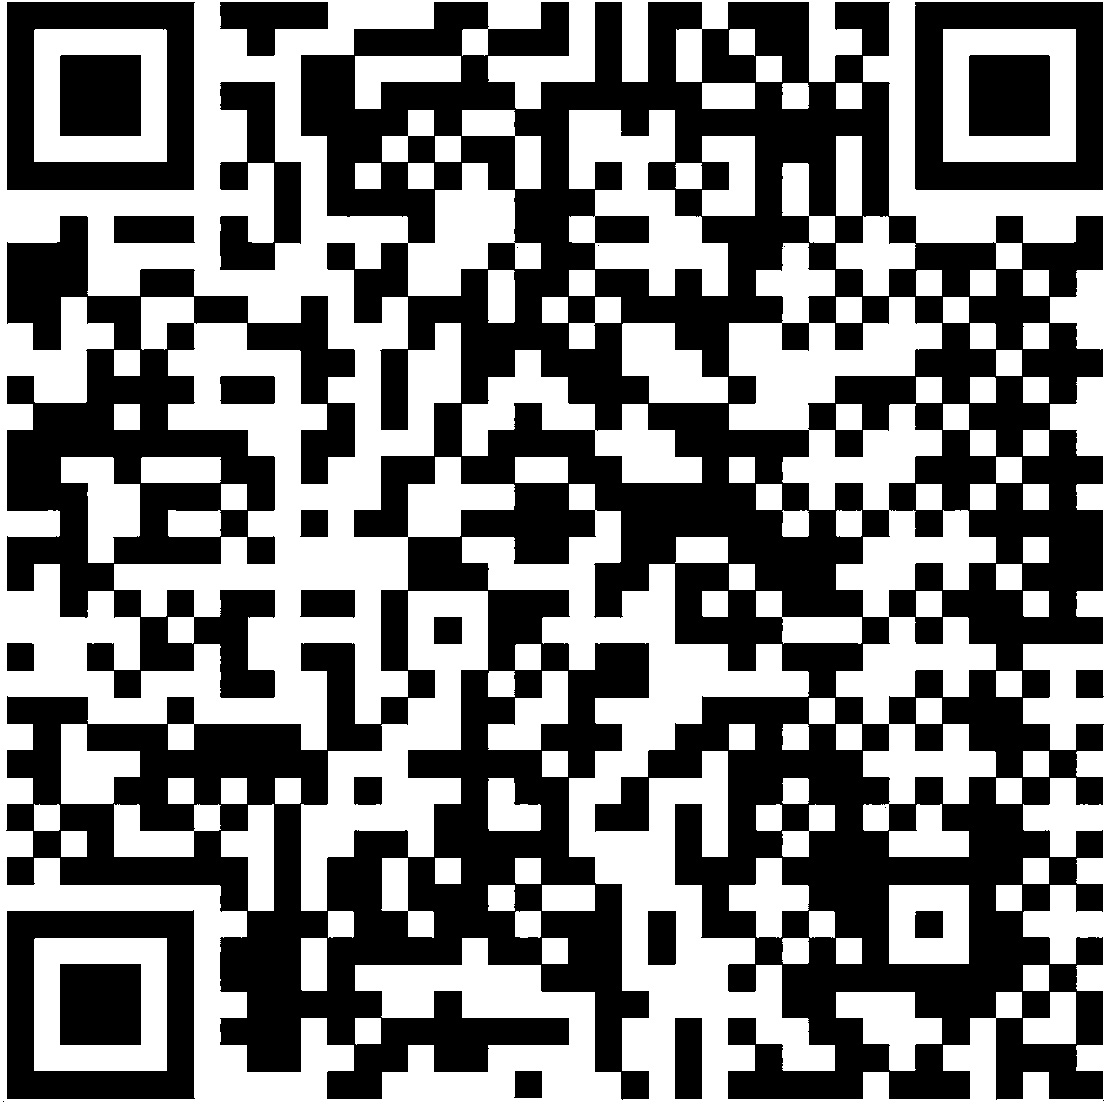 Compressing and encrypting method for QR codes